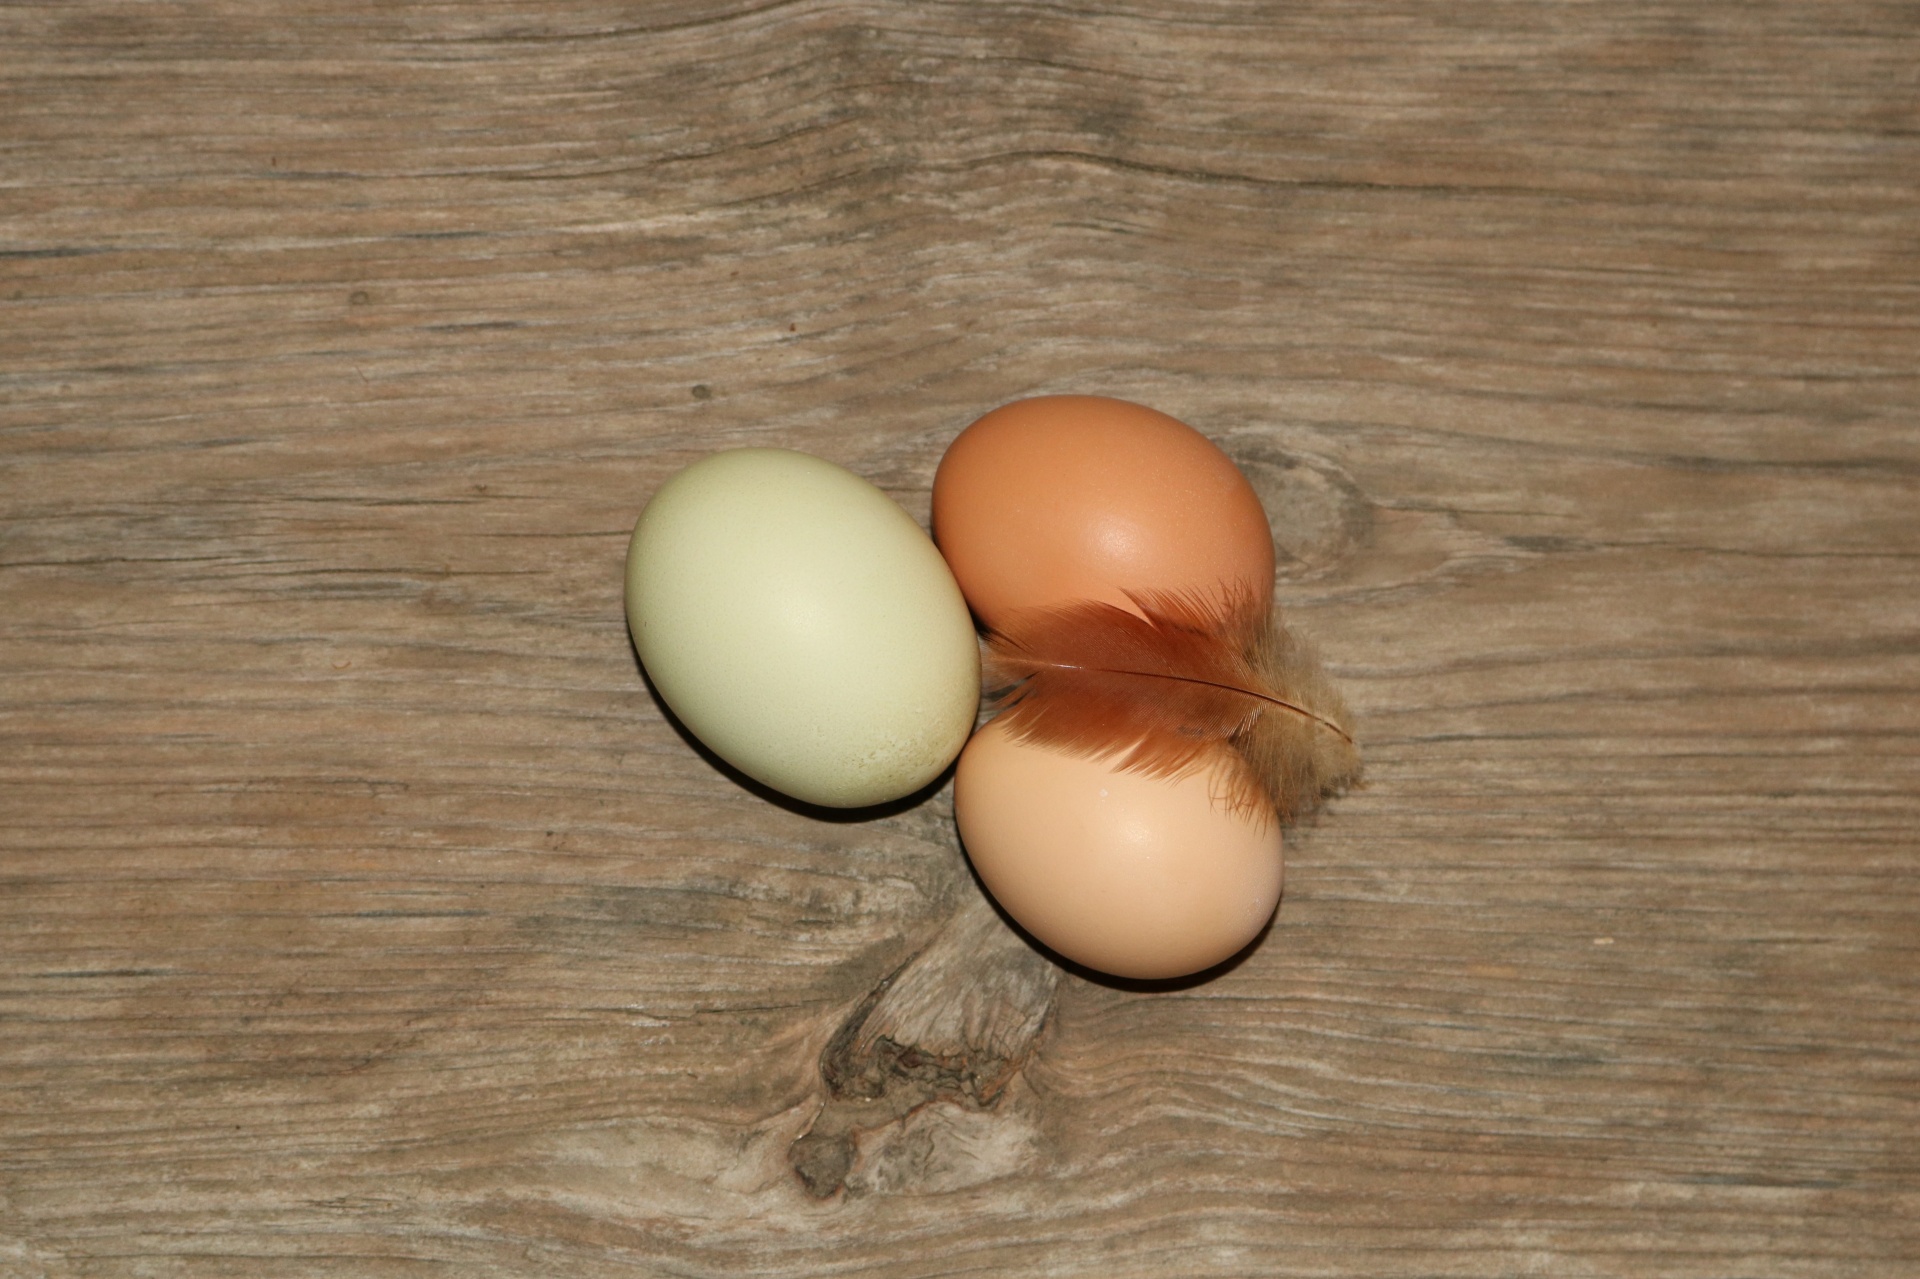 Three fresh brown and green chicken eggs and a small red chicken feather on a wooden background.